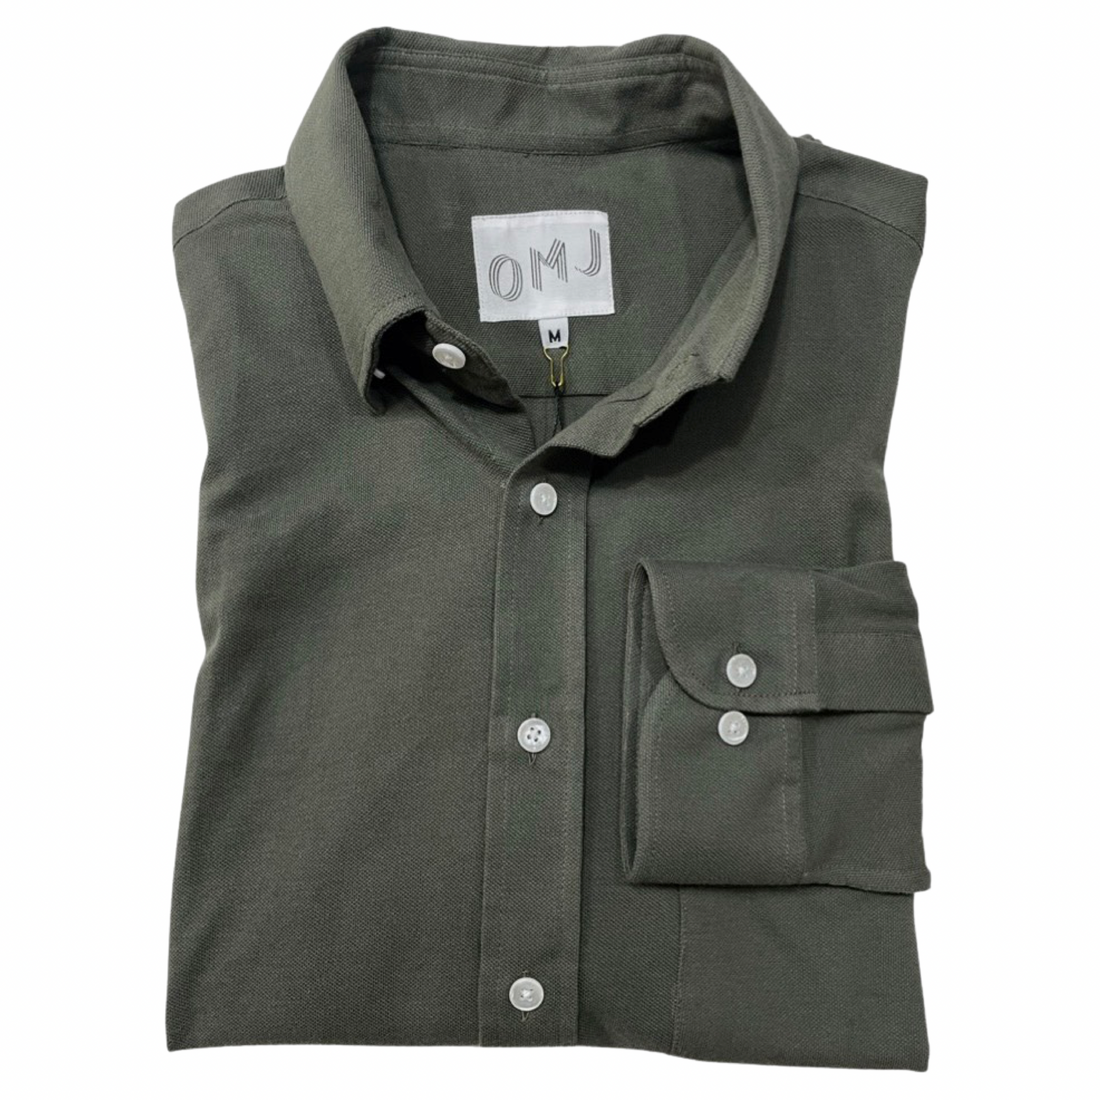 The Military Green Knit Button Down